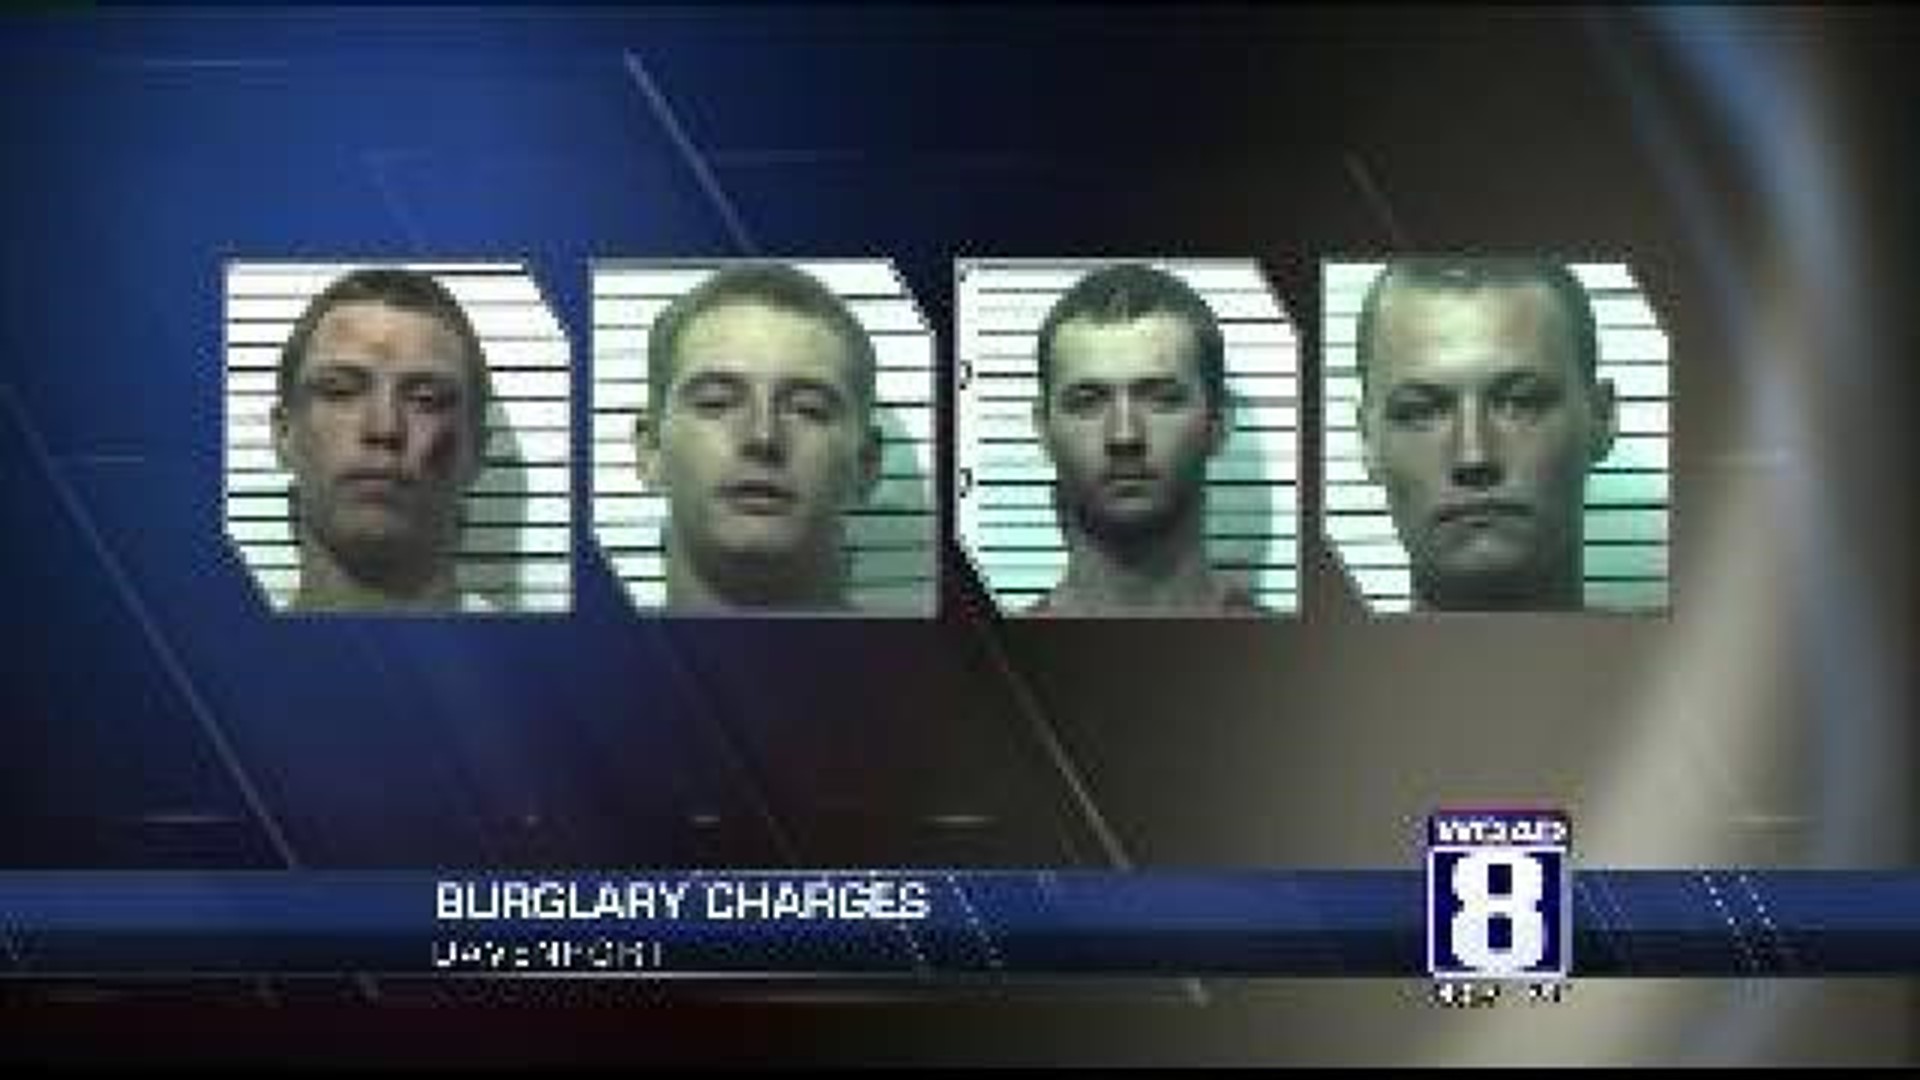 Charges files after burglary in Davenport